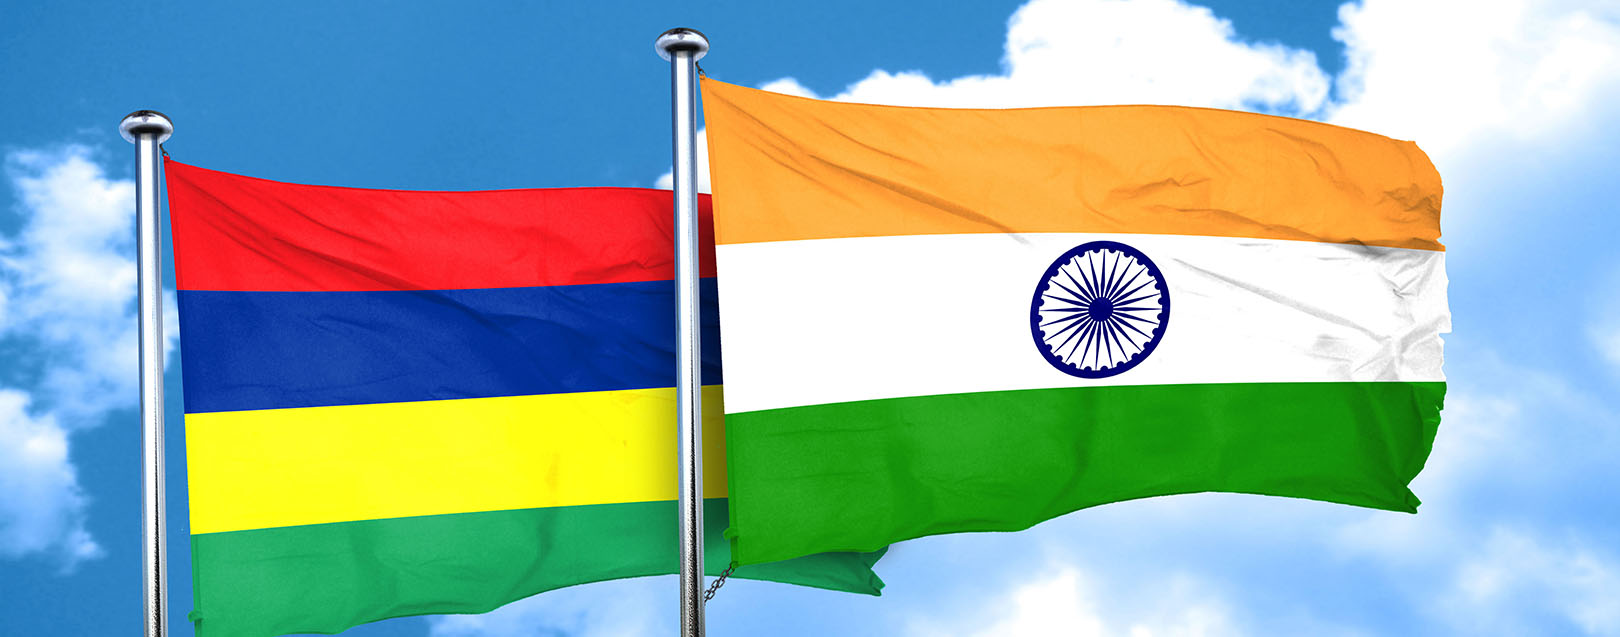 Mauritian firms invest $300 m in India since Jan 2003